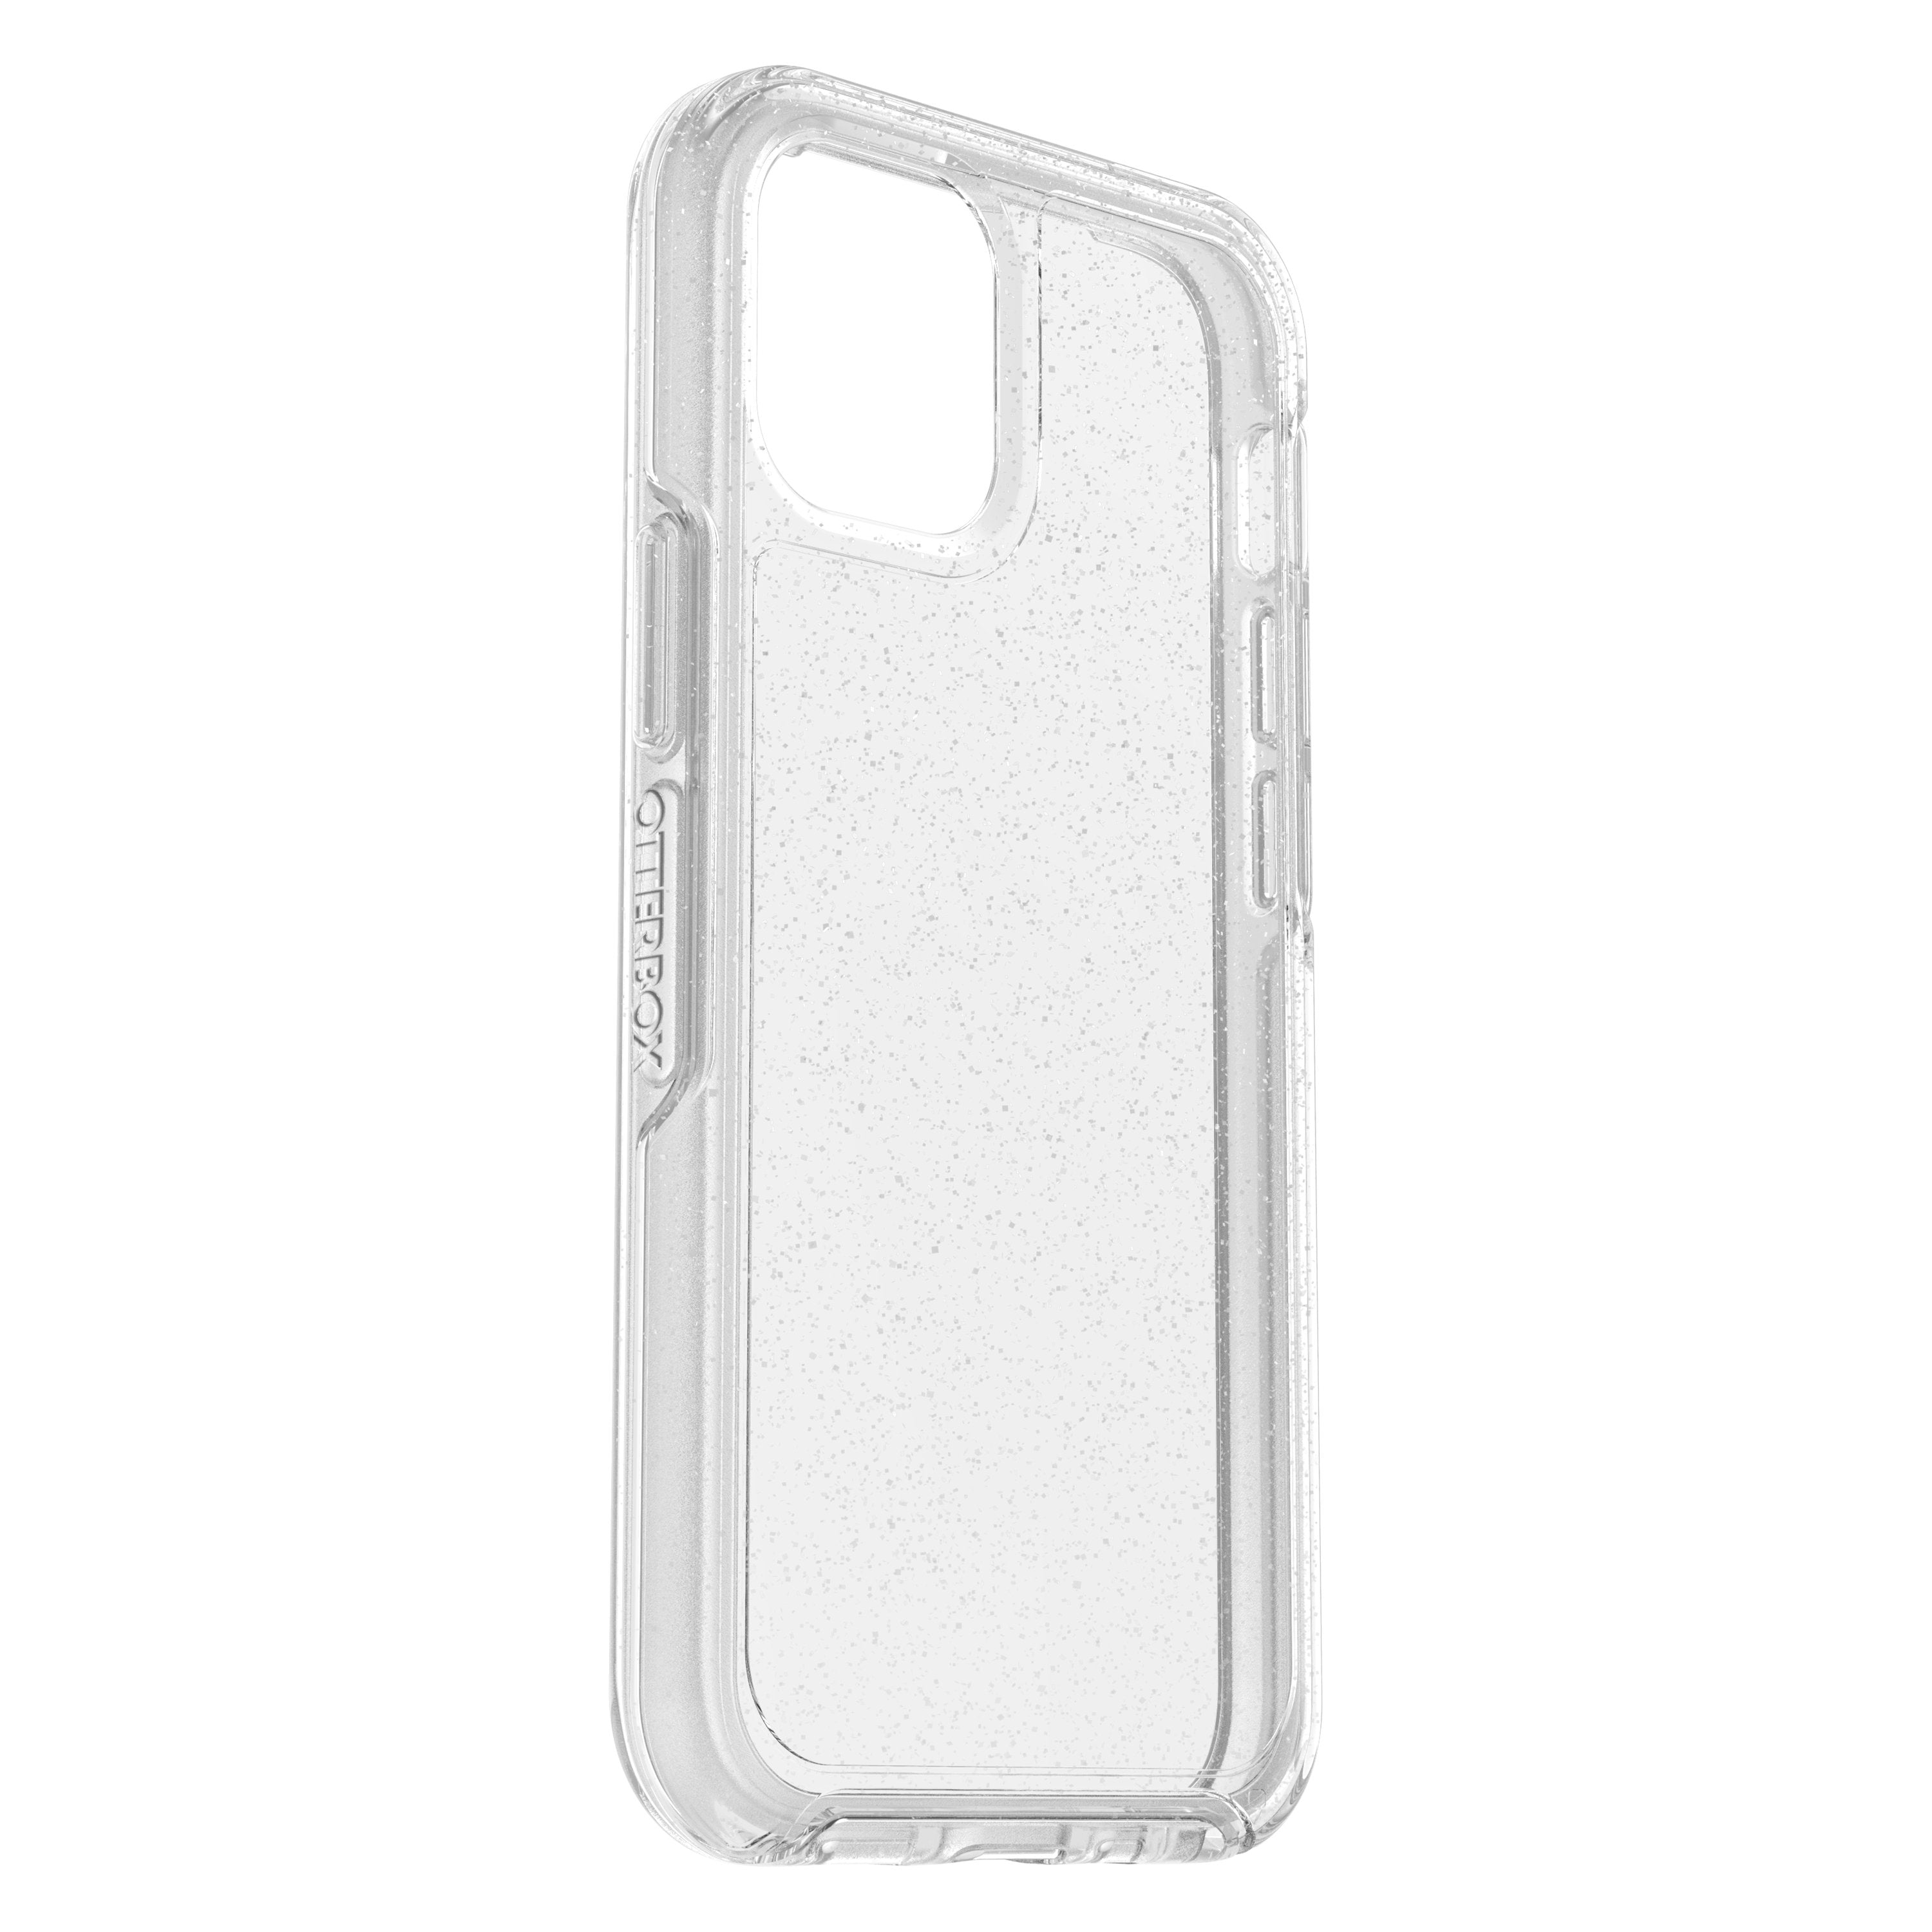 OtterBox Apple iPhone 12 Mini SYMMETRY Clear case - Slim and Lightweight Cover w/ Military Grade Drop Protection, Wireless Charging Compatible - Stardust